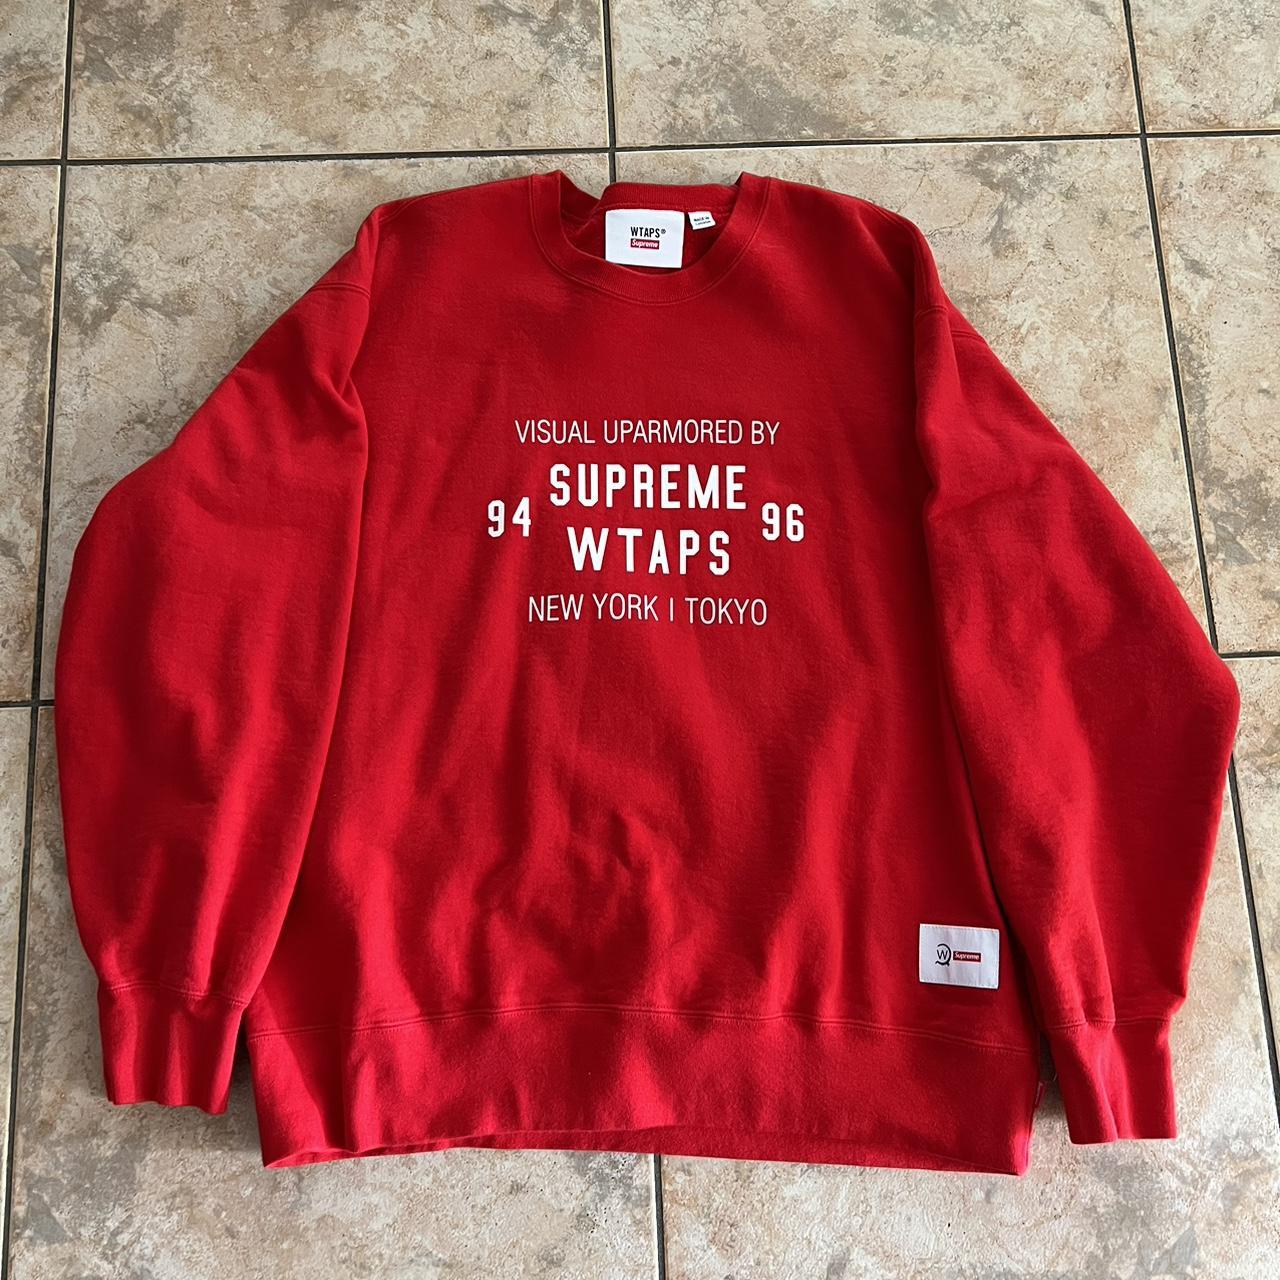 SUPREME X WTAPS CREWNECK, RED COLORWAY, SIZE XL, FROM...